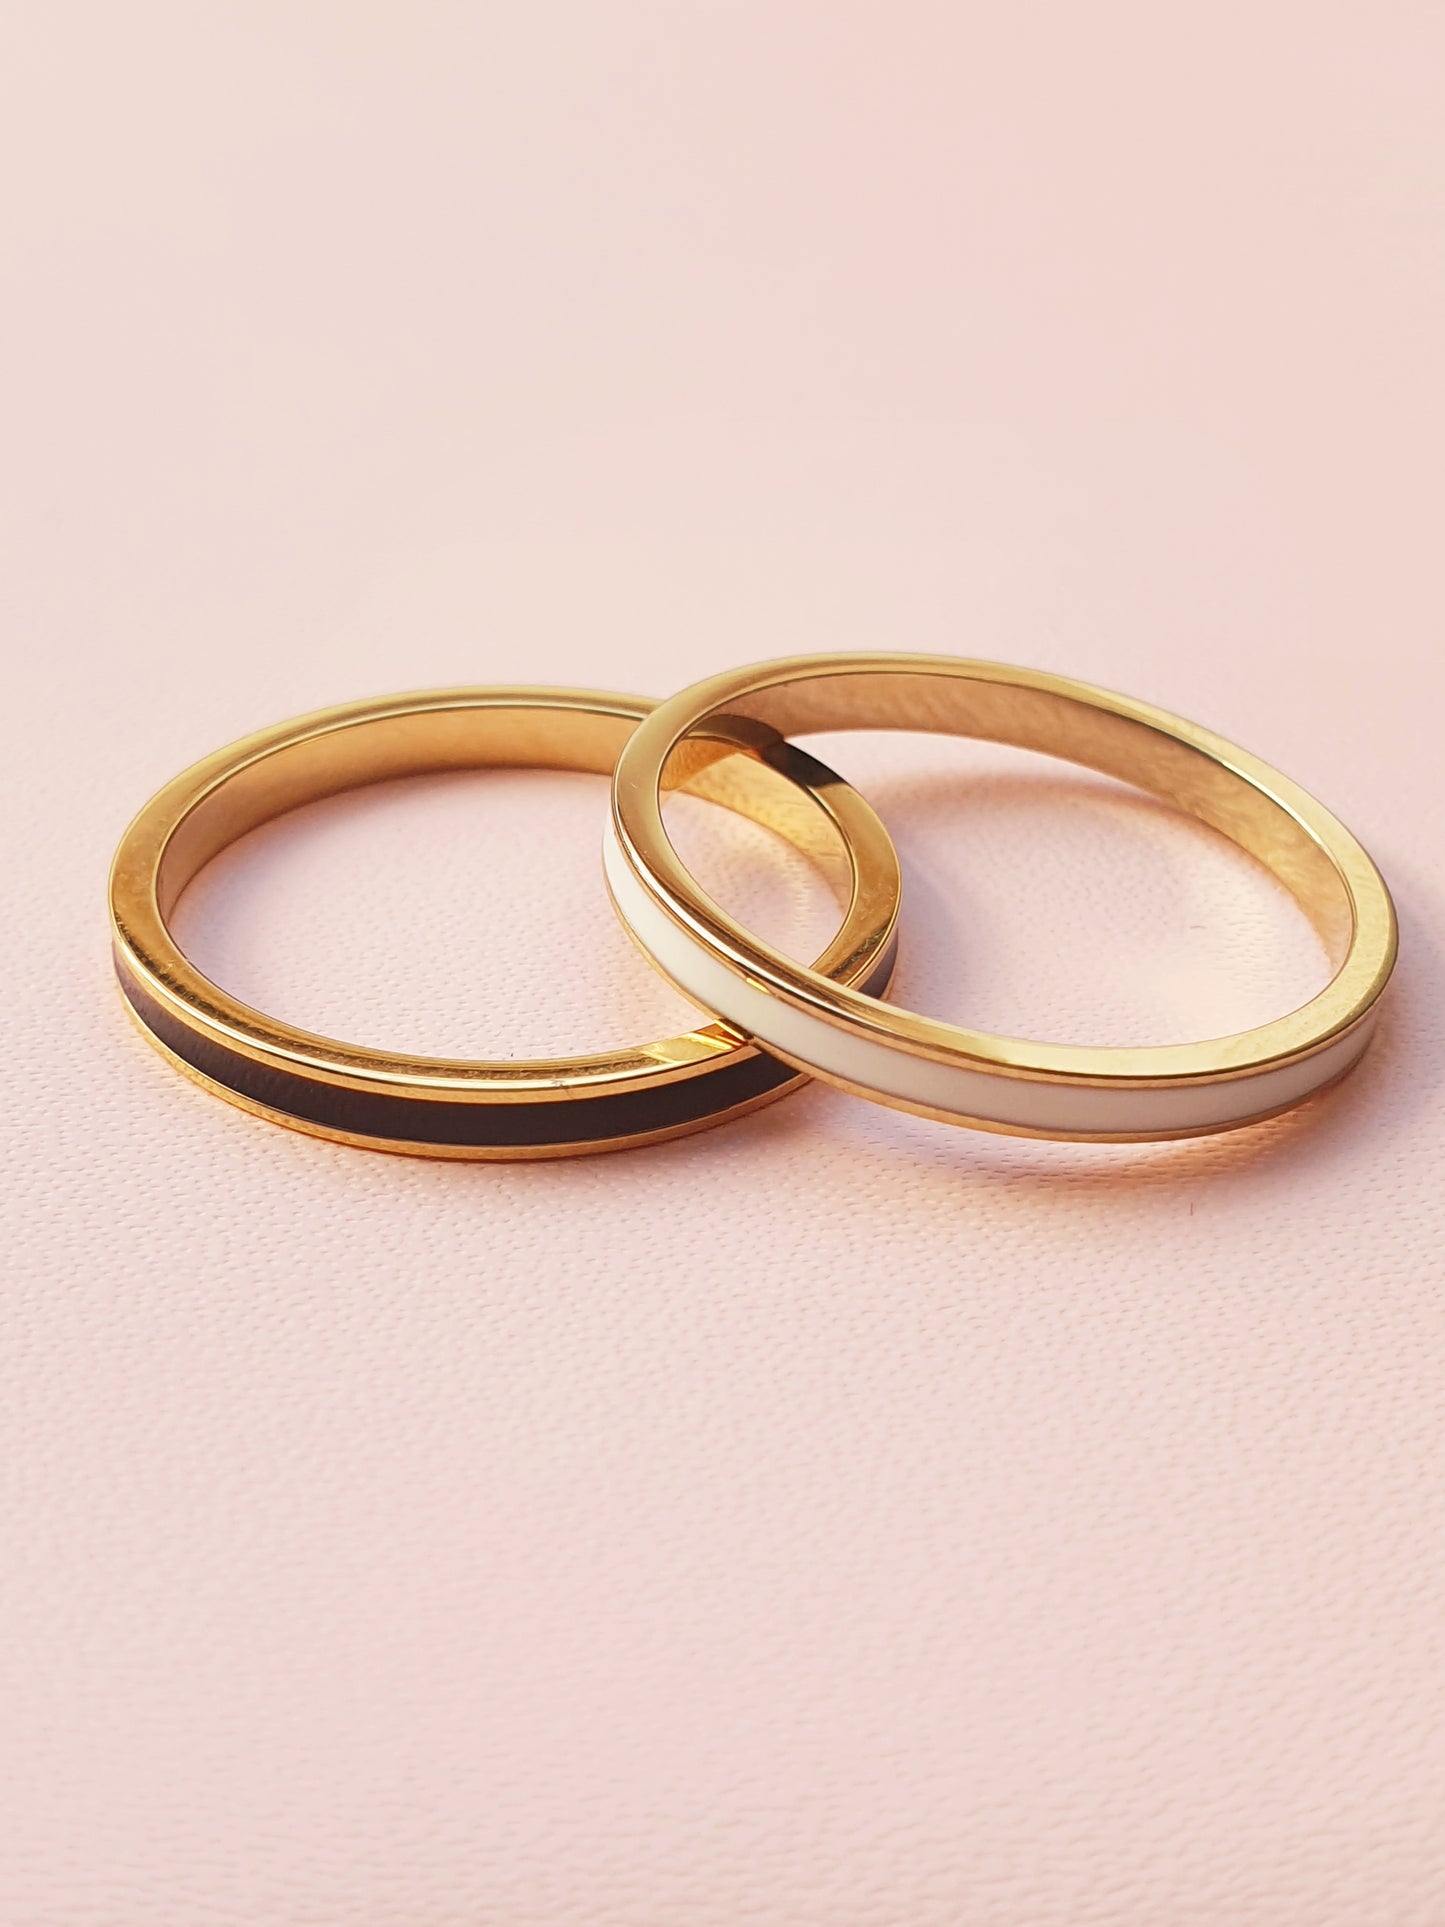 A gold band ring with white enamel banding is stacked on top of another ring with black banding 